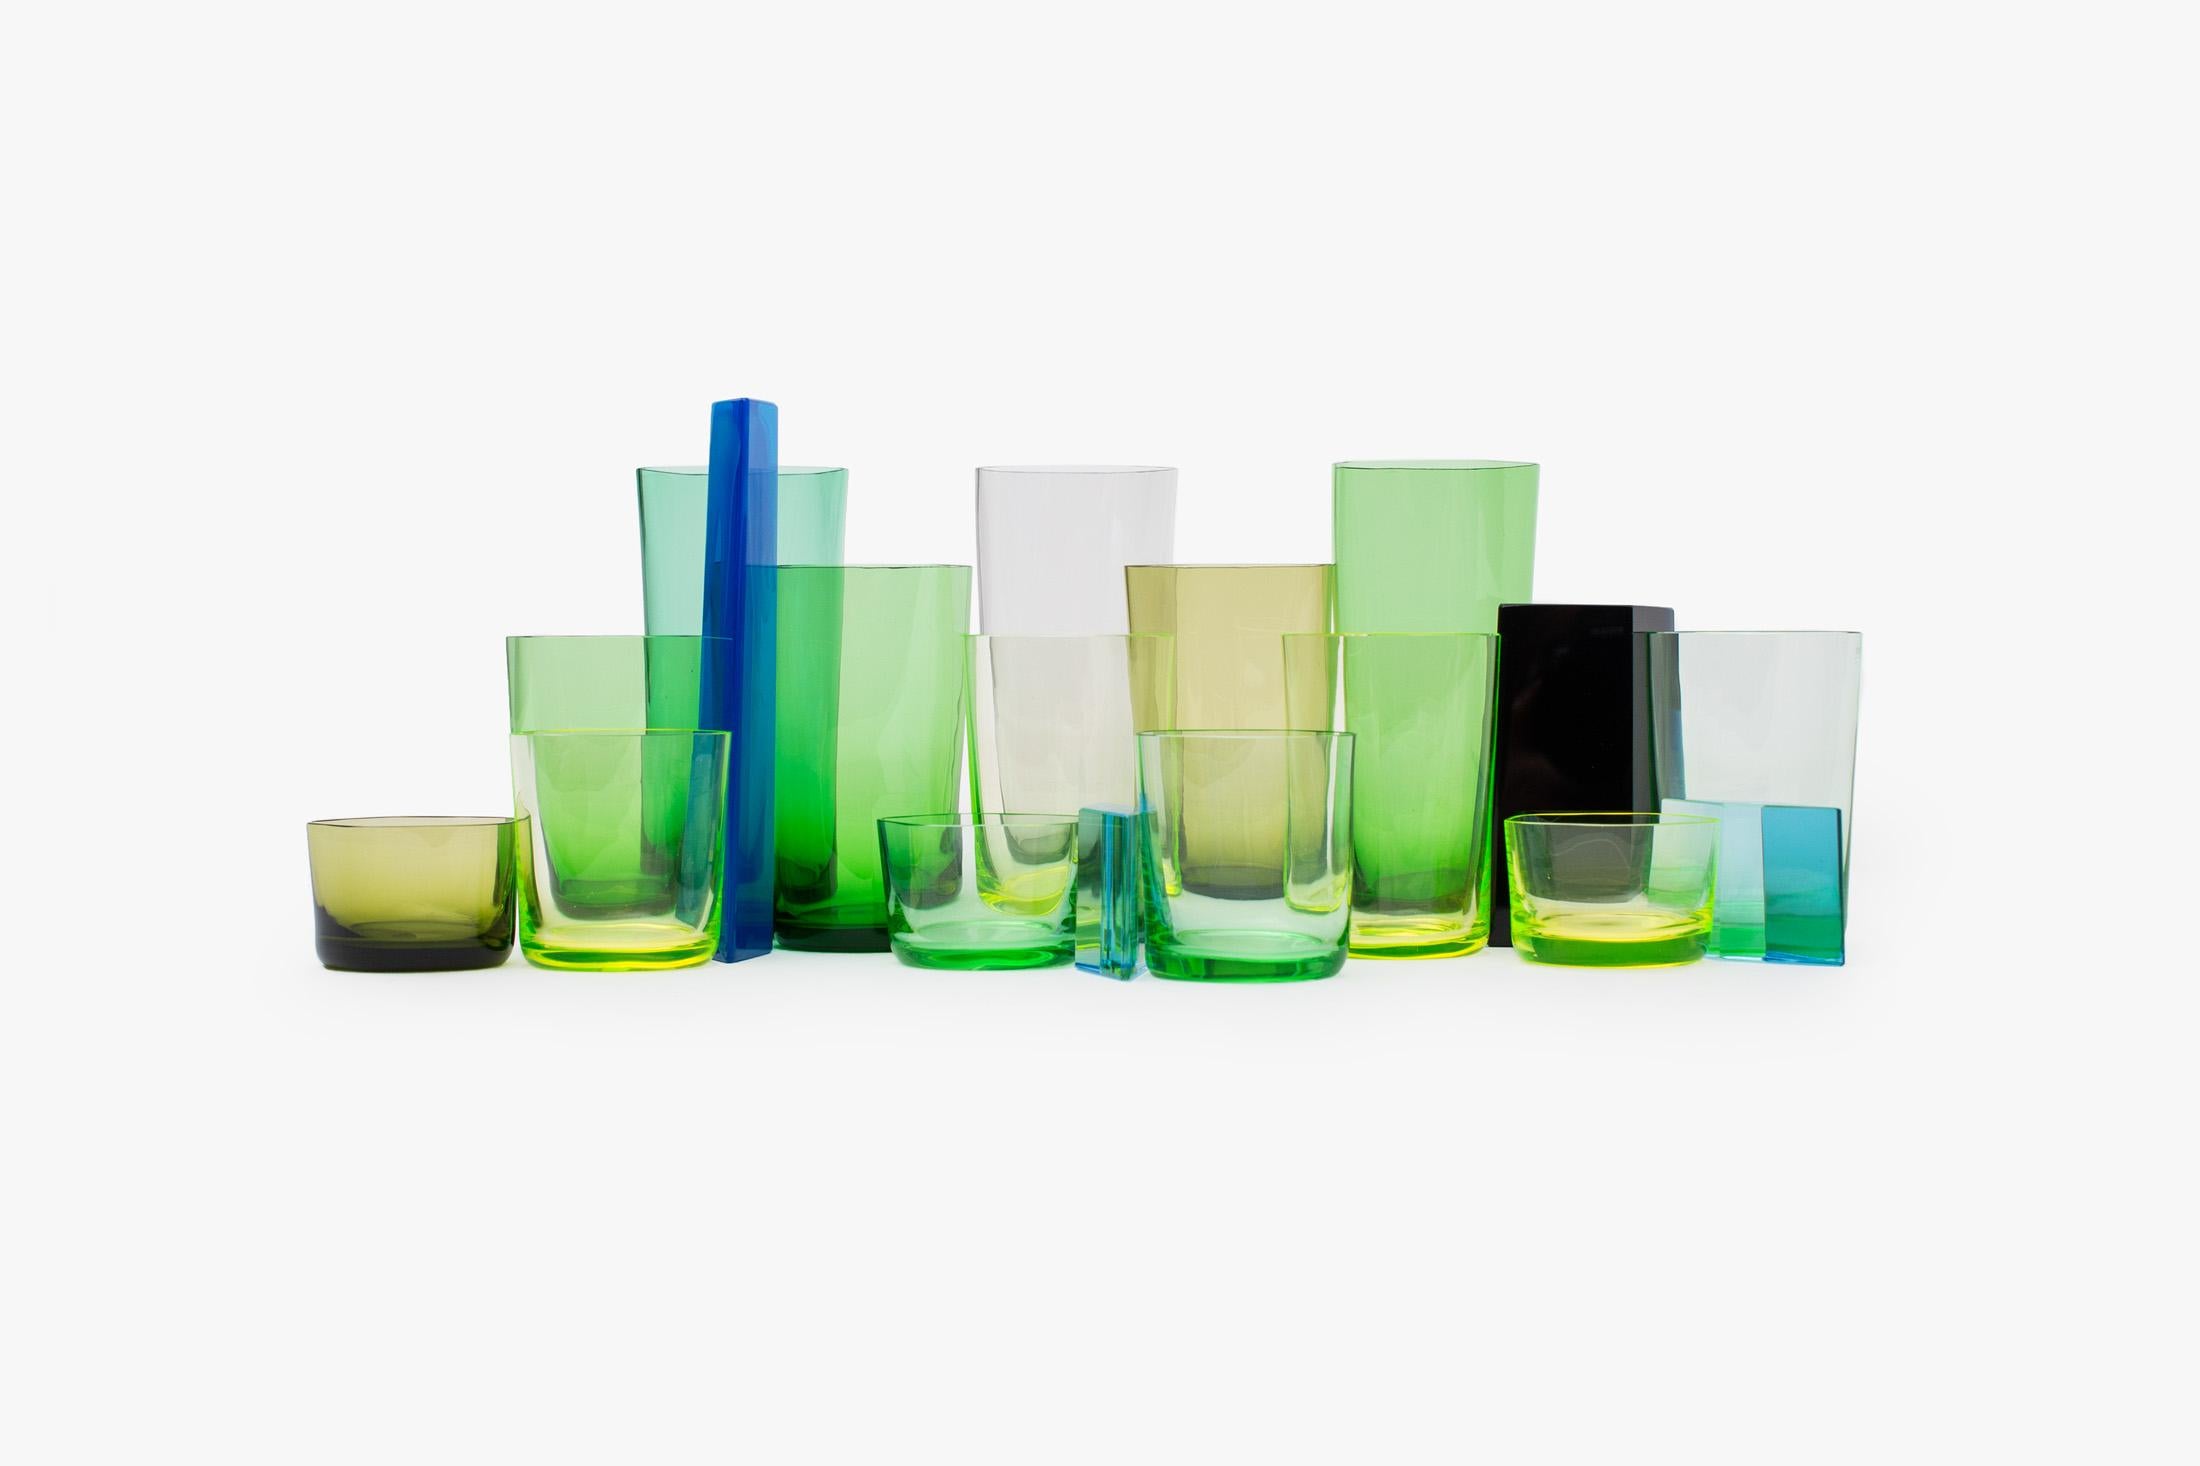 OAO Works Project 31.3 is a body of 18 individual glass elements designed to be arranged into a multiplicity of compositions. The forms of 31.3 Polygon Glassware can be traced back to two distinct sources: a mathematical query into geometric tiling